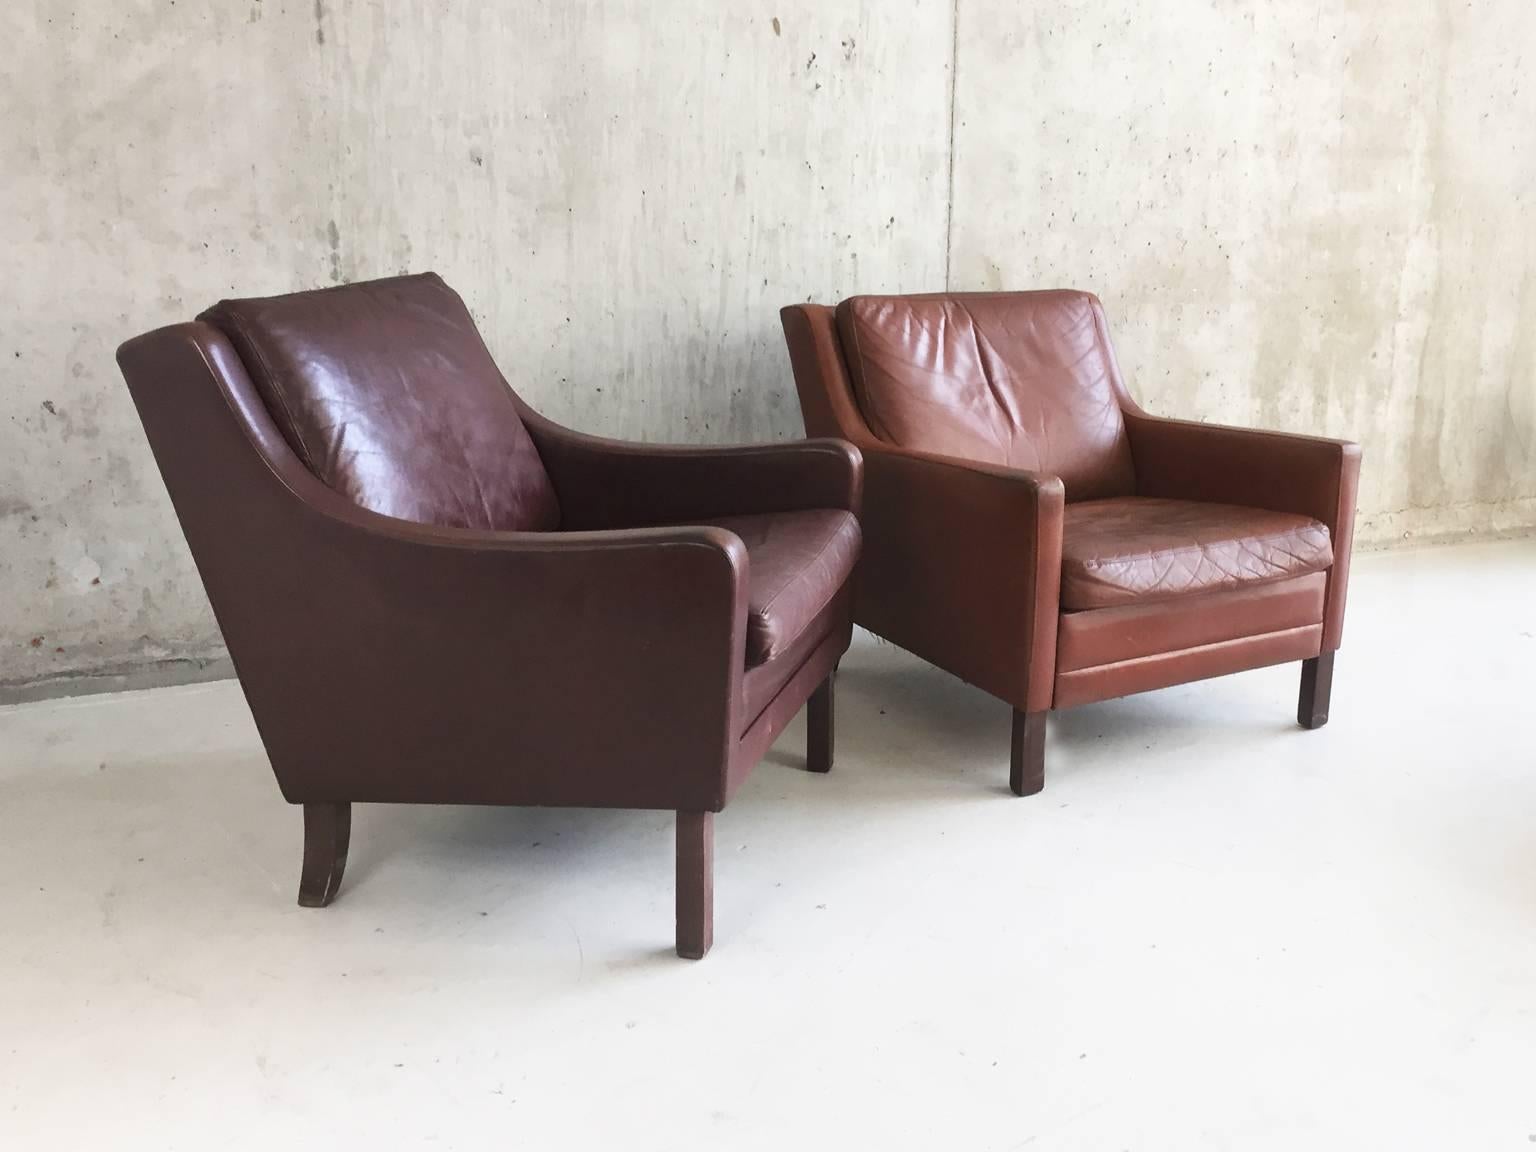 A great matching pair of elegant original 1970s Danish club or lounge chairs each upholstered in a different brown leather. Very much in the style of influential Danish furniture designer Børge Mogensen.

Designer: In the style of Børge